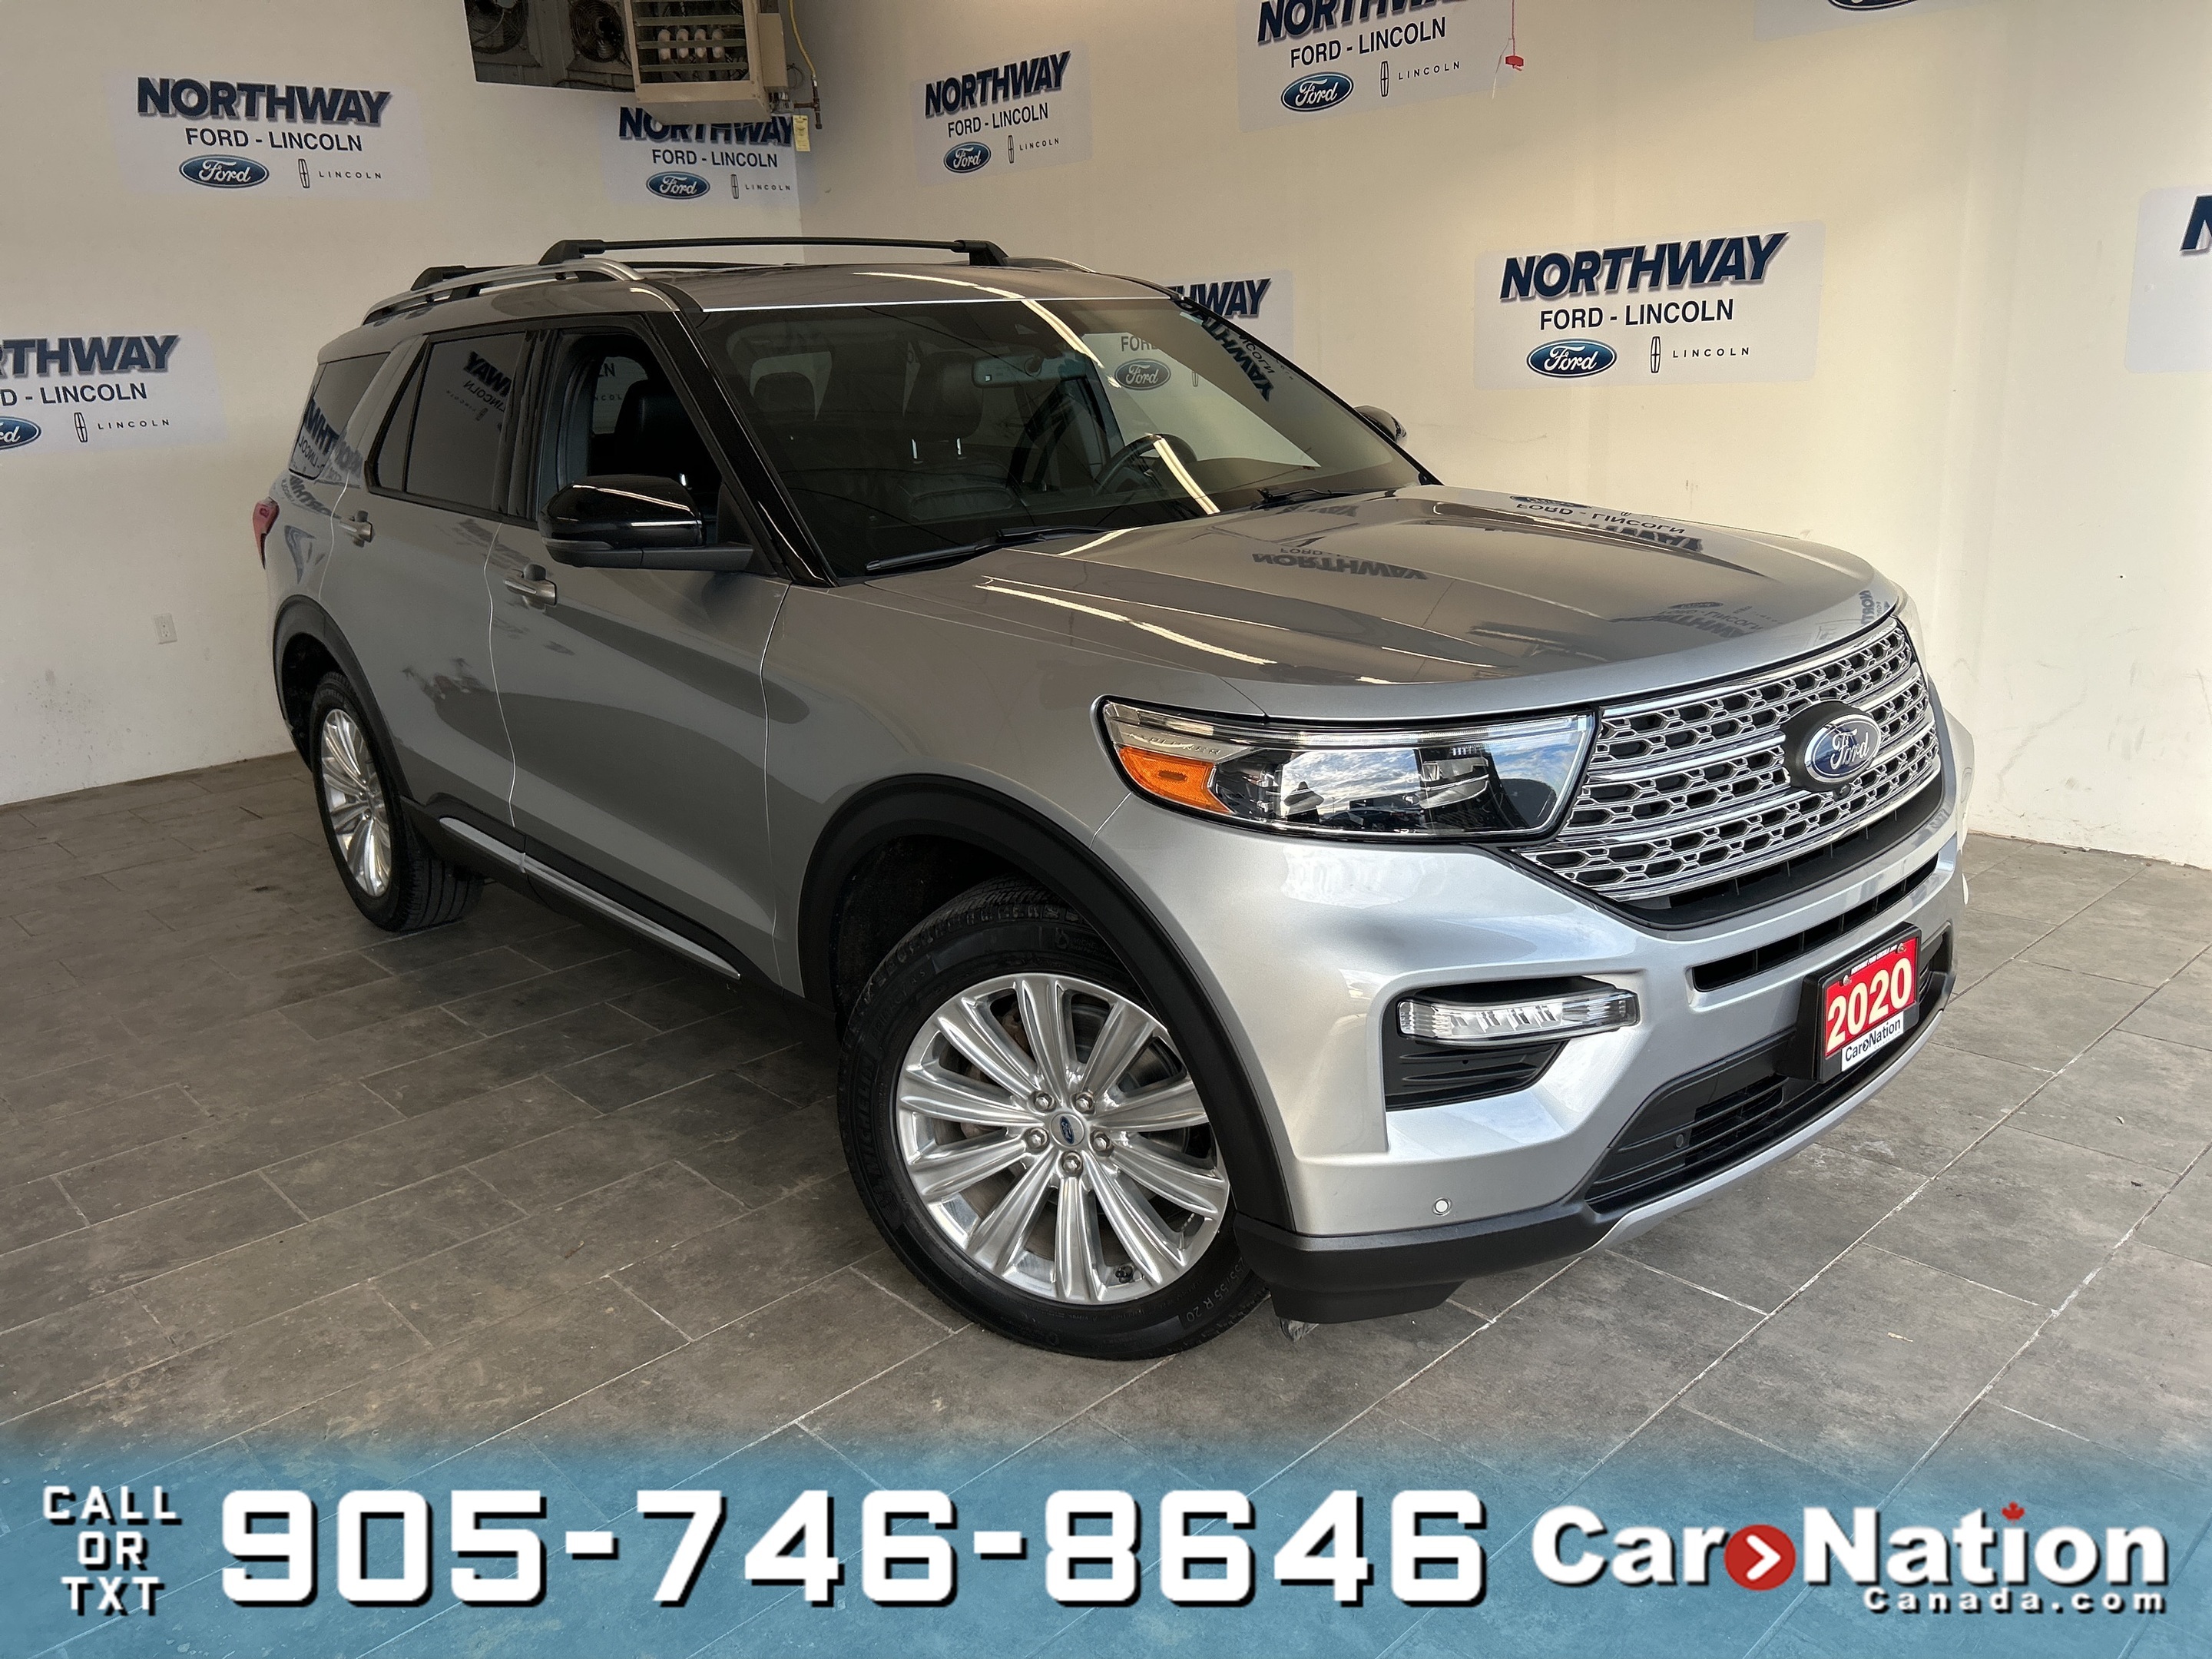 2020 Ford Explorer LIMITED | 4X4 | LEATHER | SUNROOF | NAV | 20" RIMS